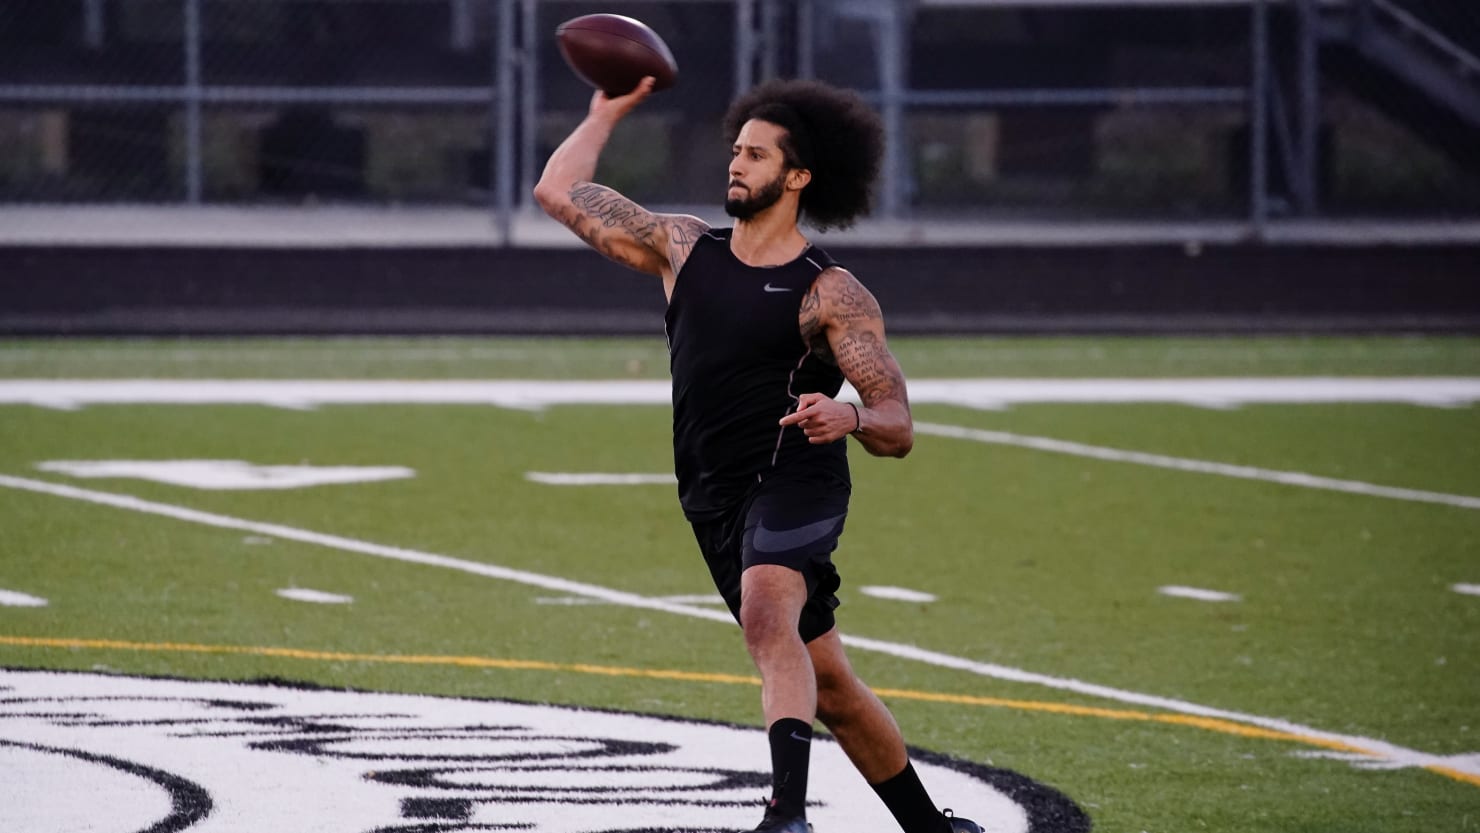 Colin Kaepernick Asked to Lead Jets' Practice Squad, Letter Reveals